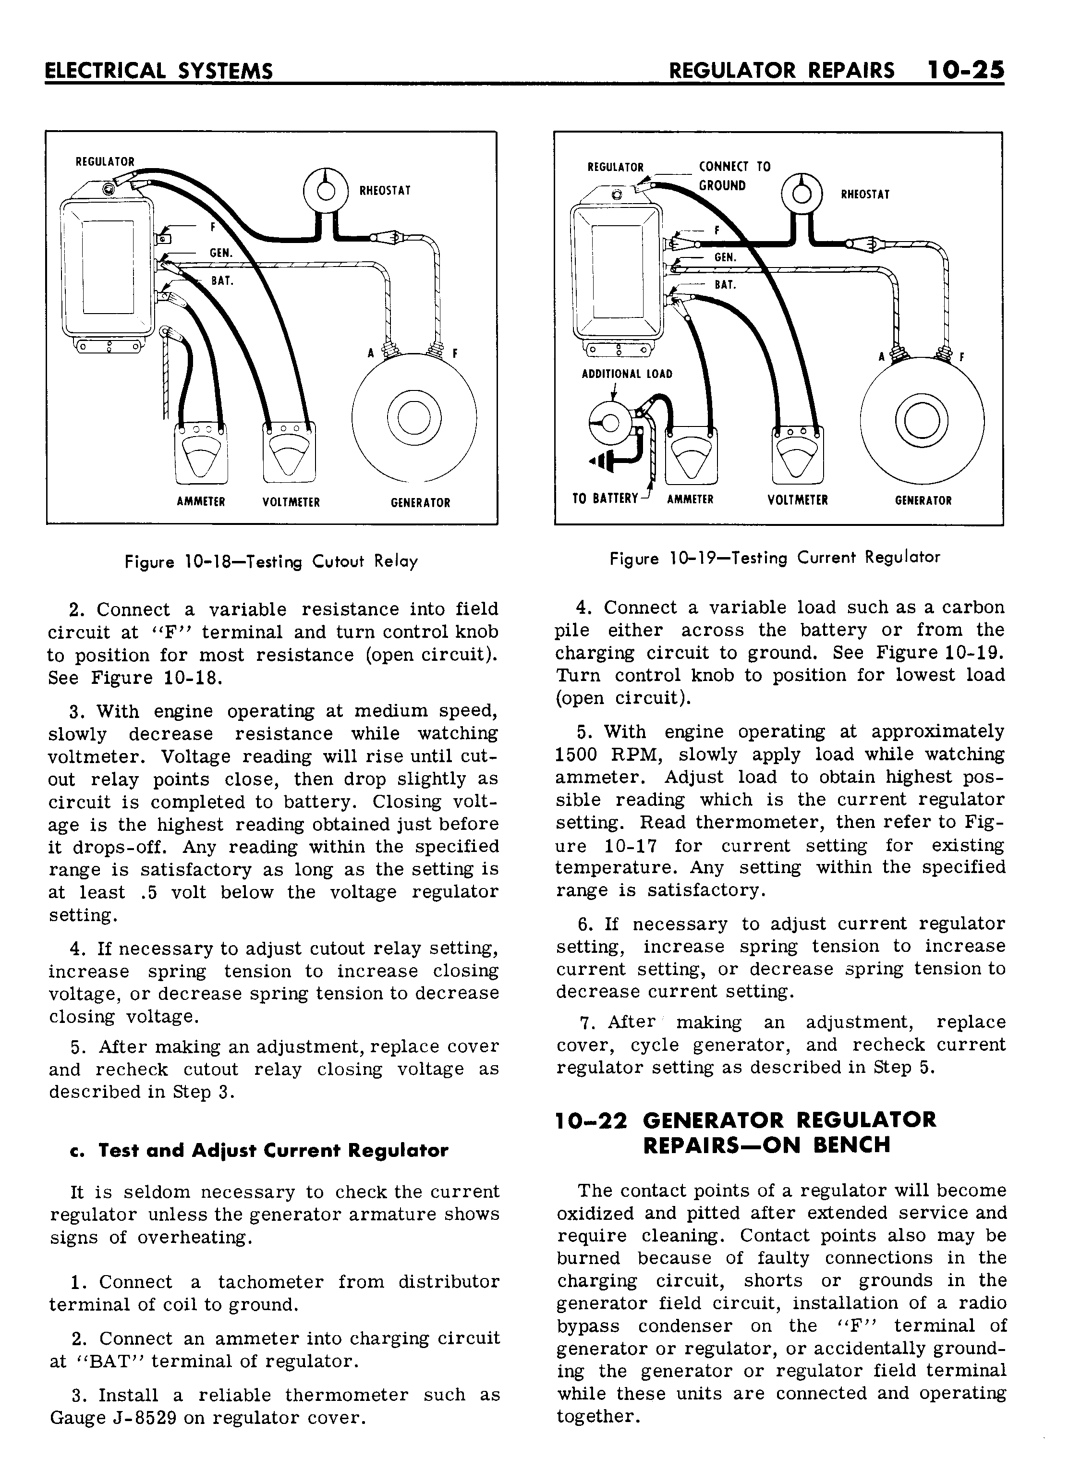 n_10 1961 Buick Shop Manual - Electrical Systems-025-025.jpg